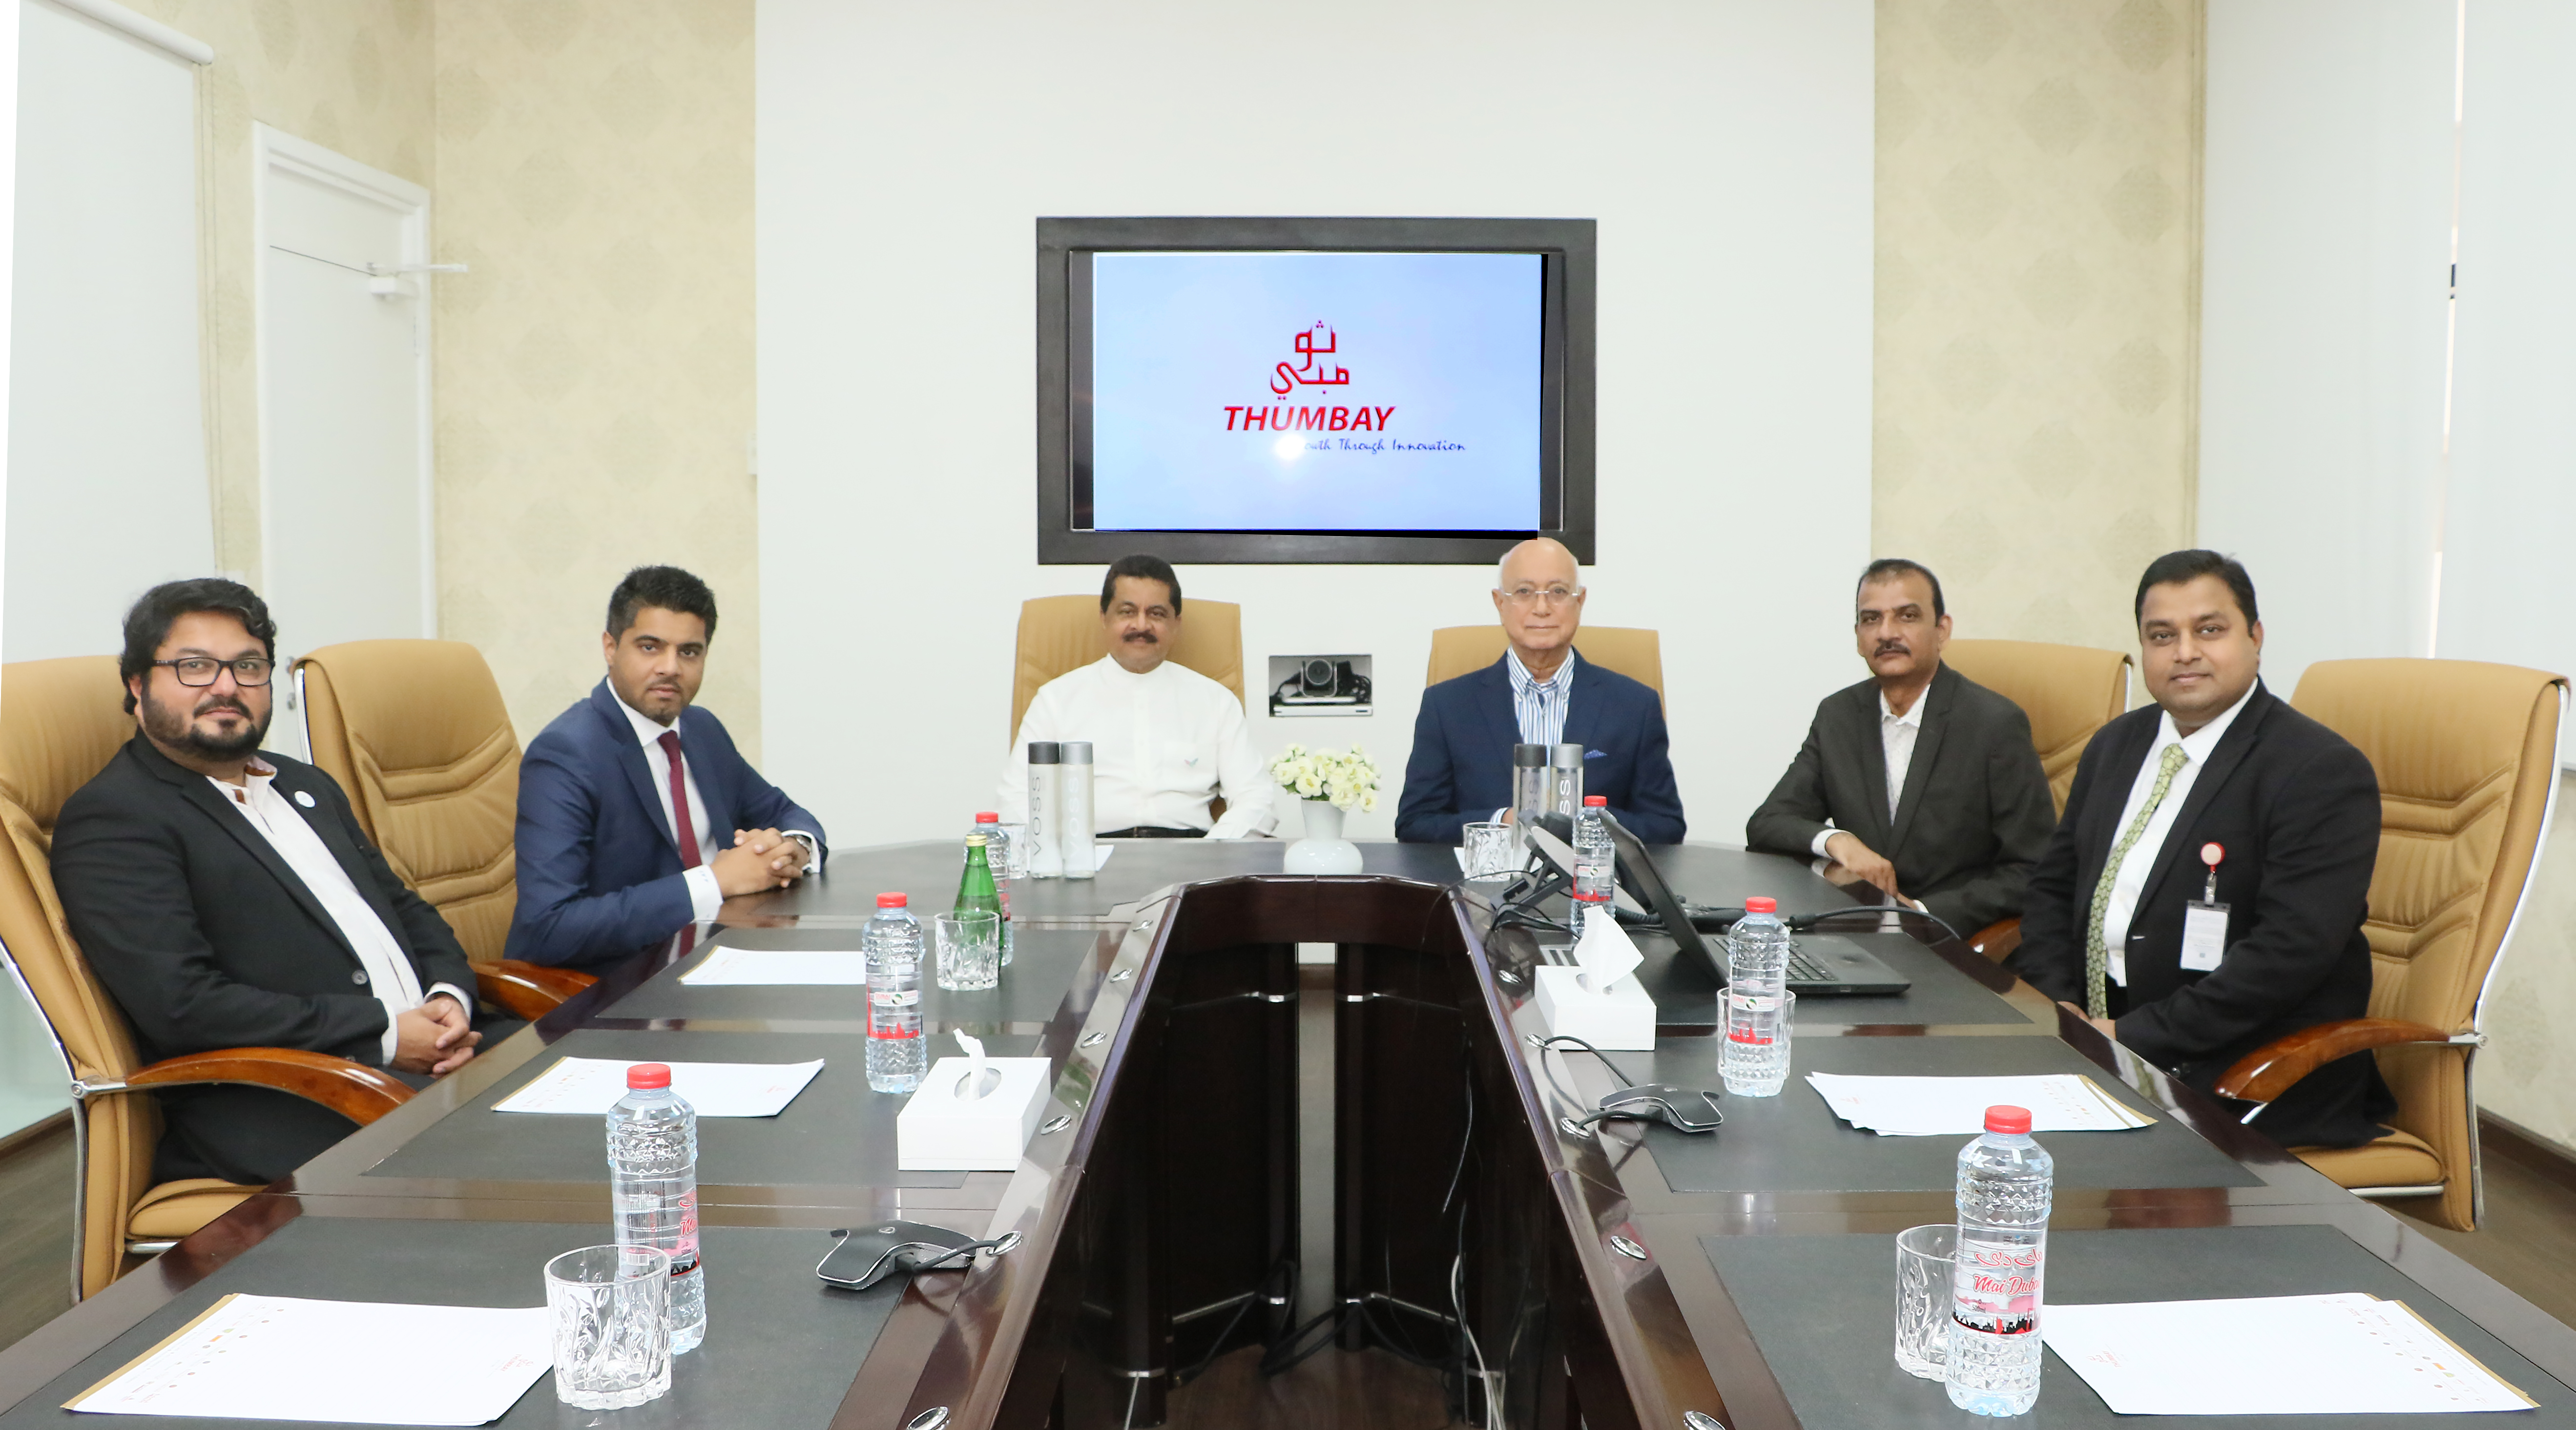 medical-education-healthcare-research-activities-of-thumbay-group-gears-up-aligns-with-uae-governments-precautionary-policies